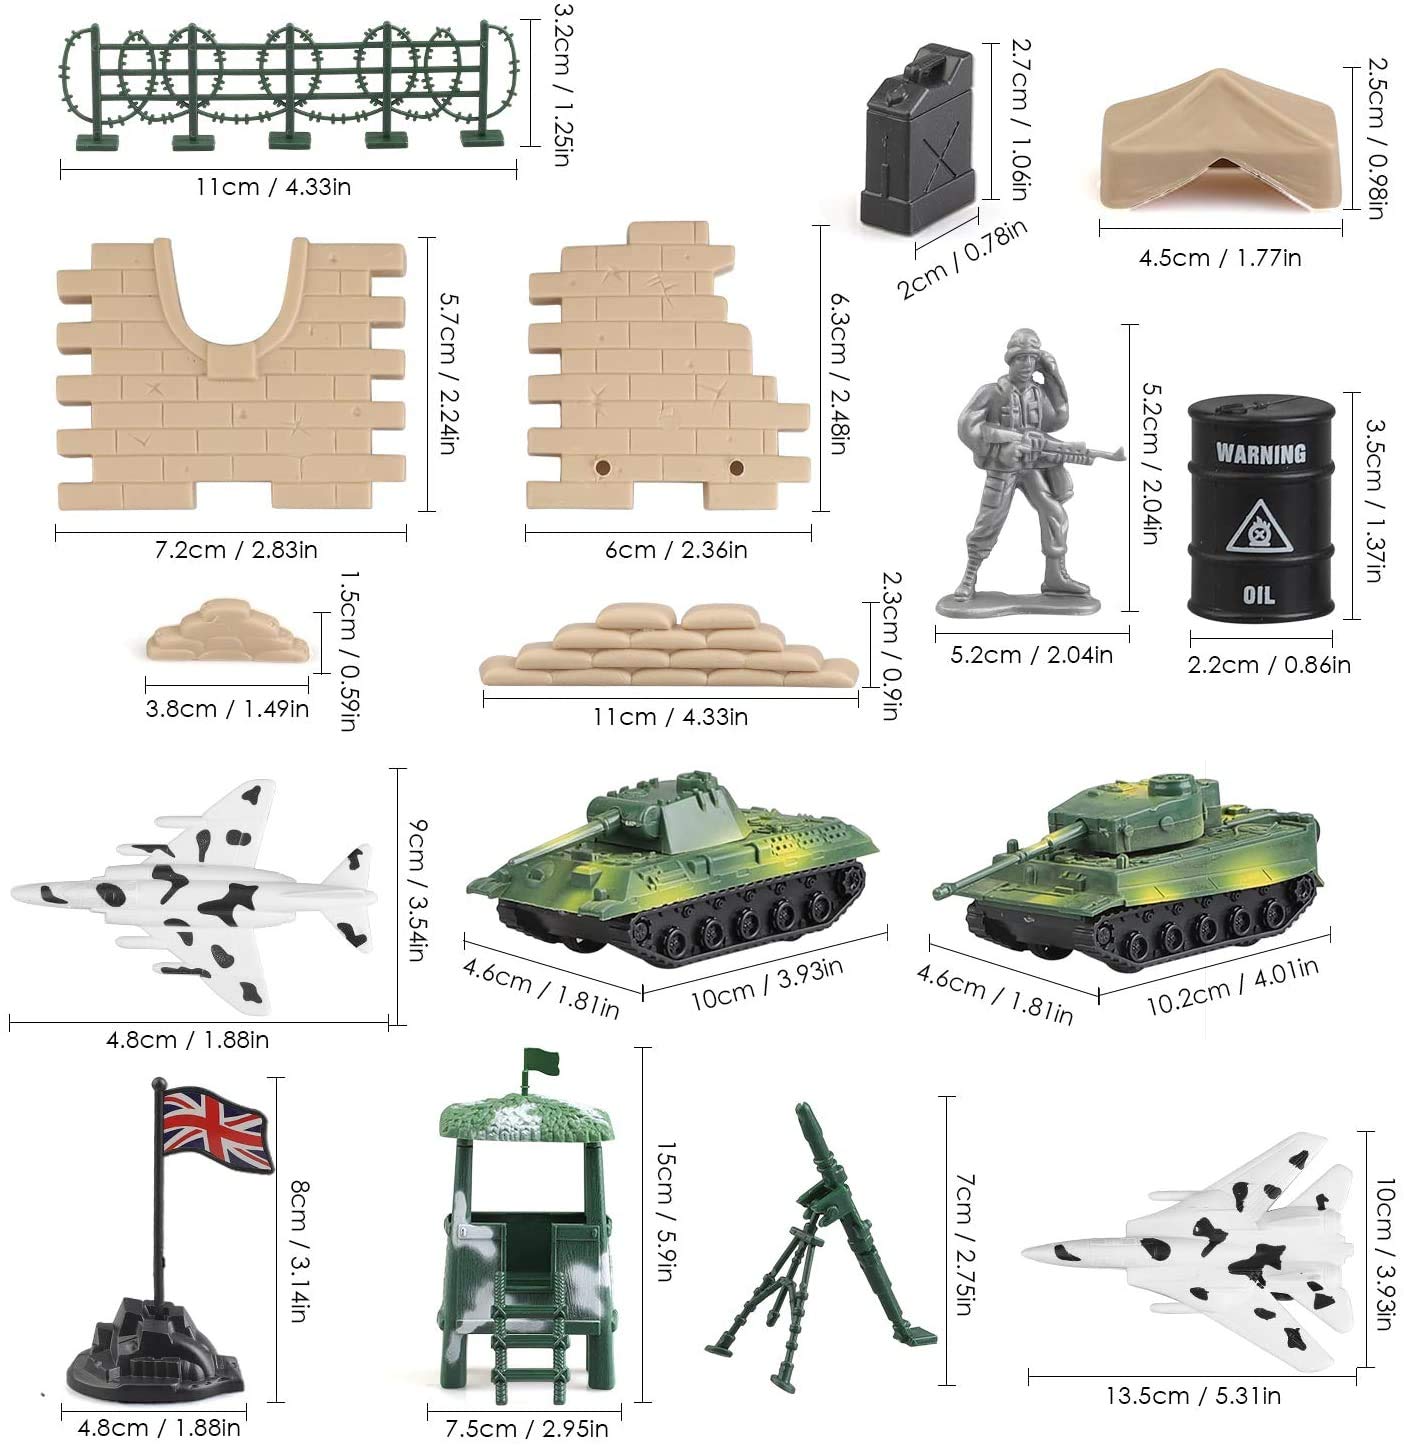 kramow 250 PCS Army Men Army Soldier Plastic Toys, Military Action Figures Playset with Tanks, Planes, Soldier Figures and Accessories for Kids Boys and Girls